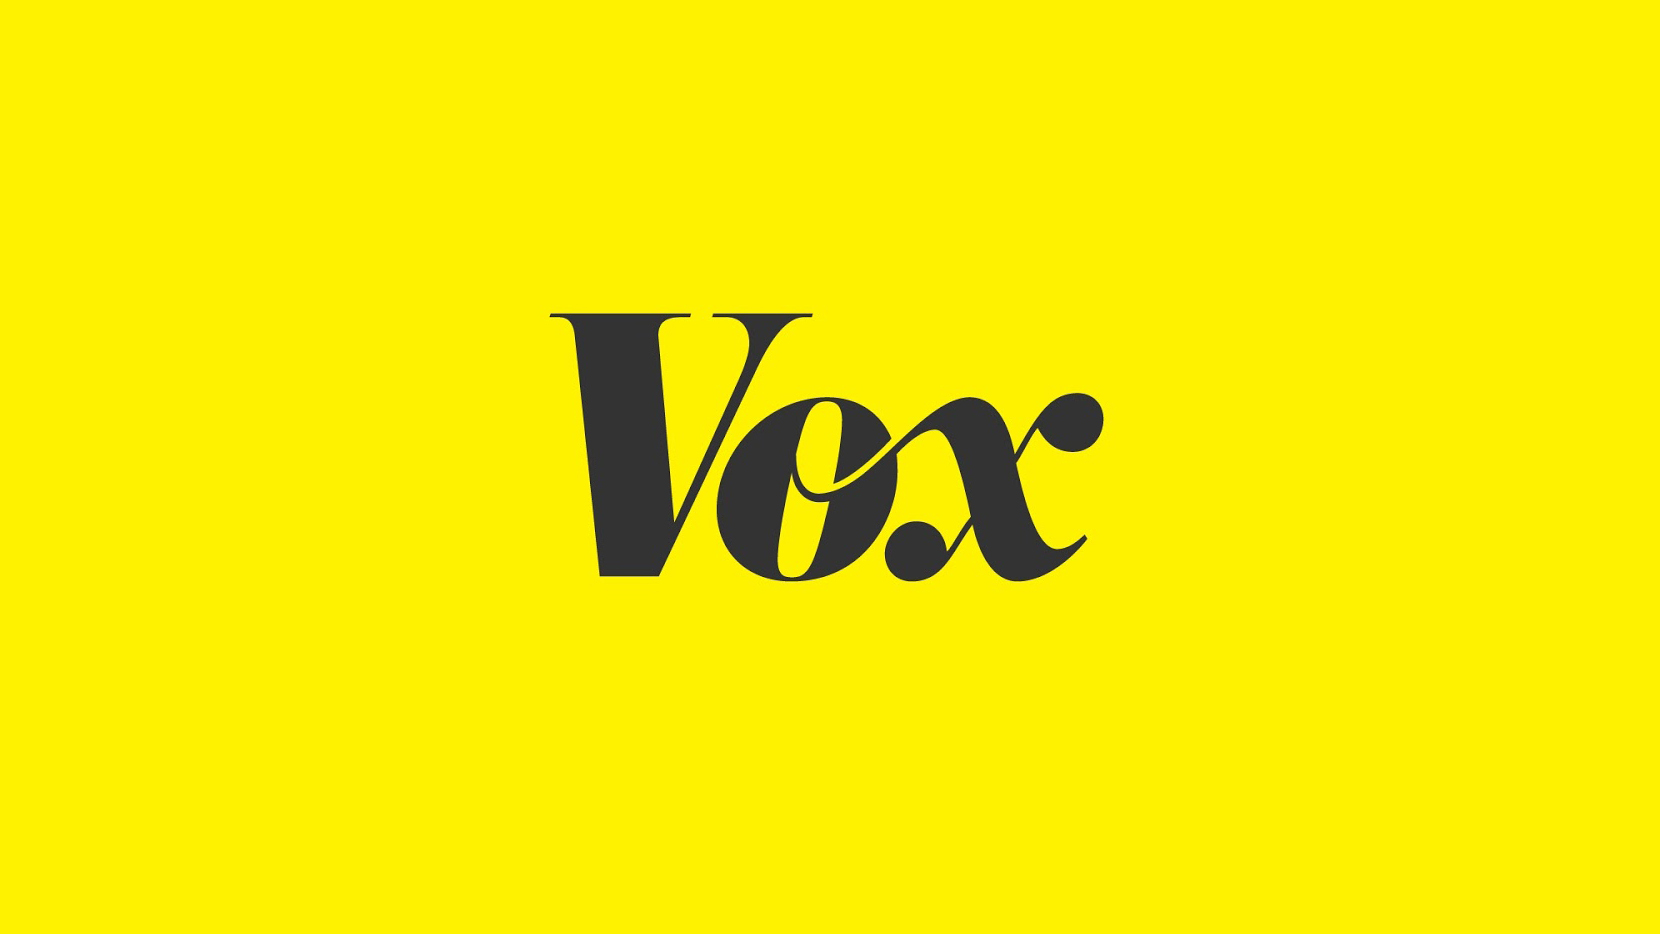 Apple closes with Vox for its news service; New York Times CEO Warns Publishers